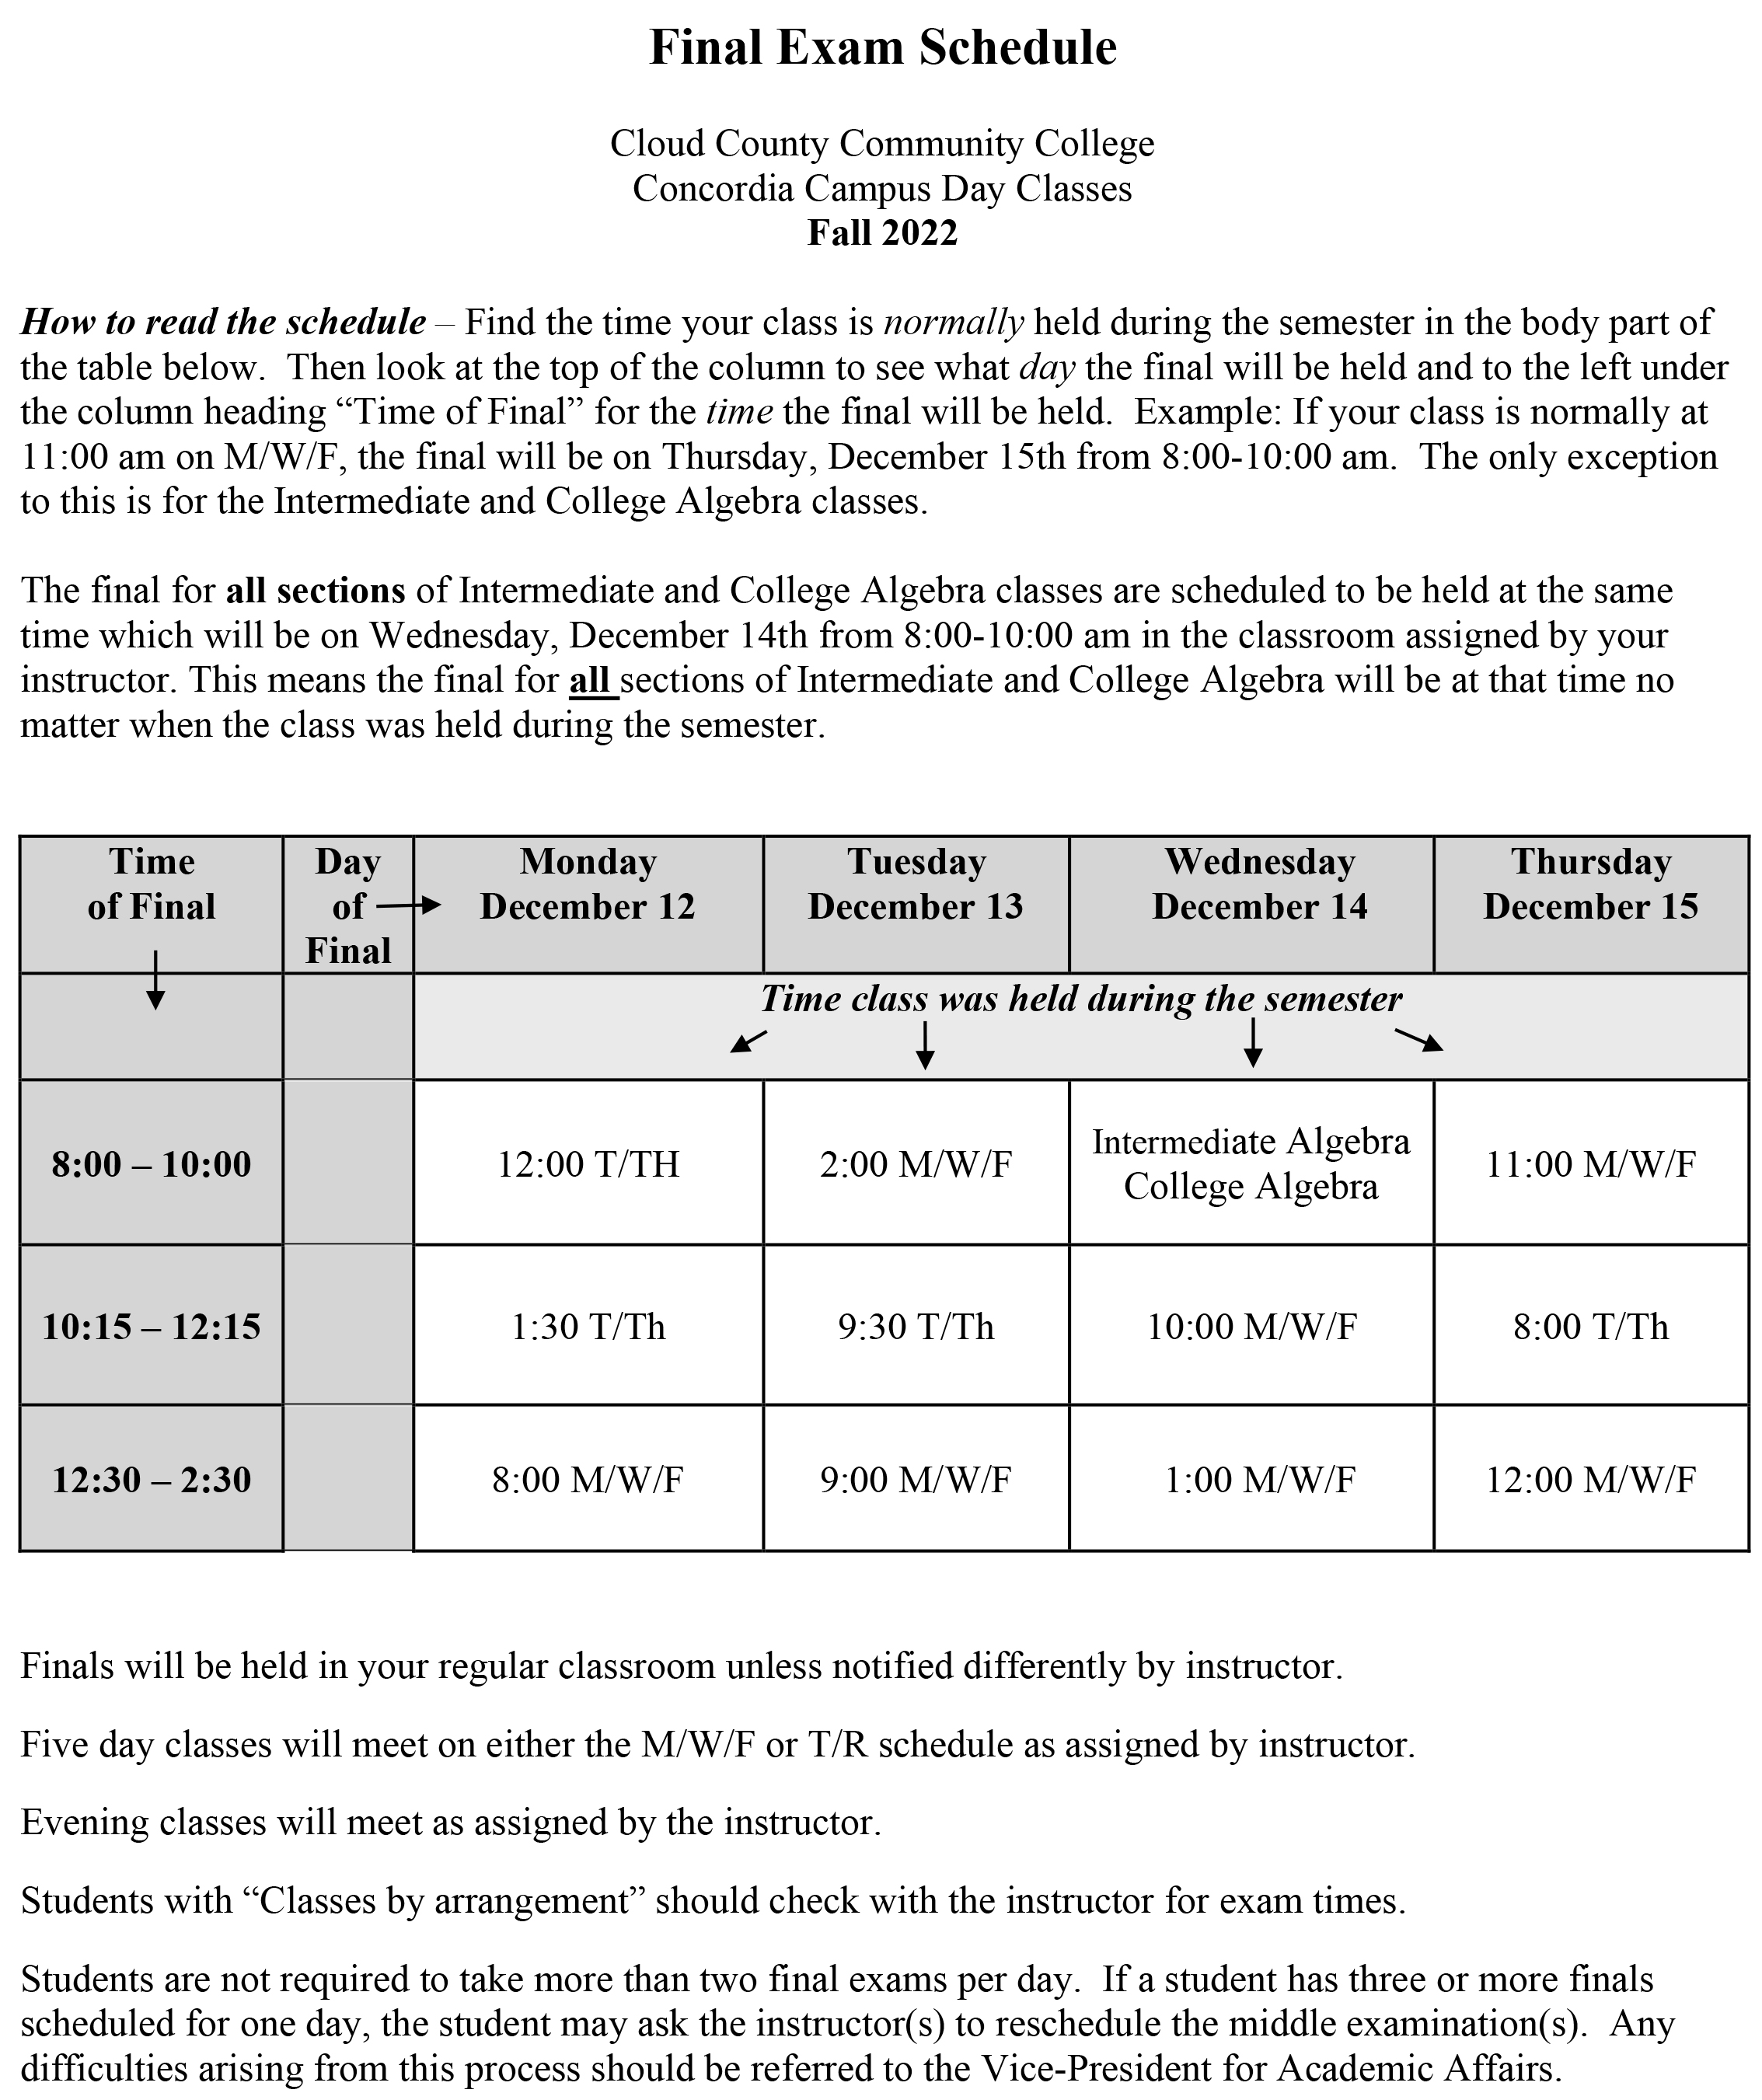 The Final Exam Schedule - Fall 2022.